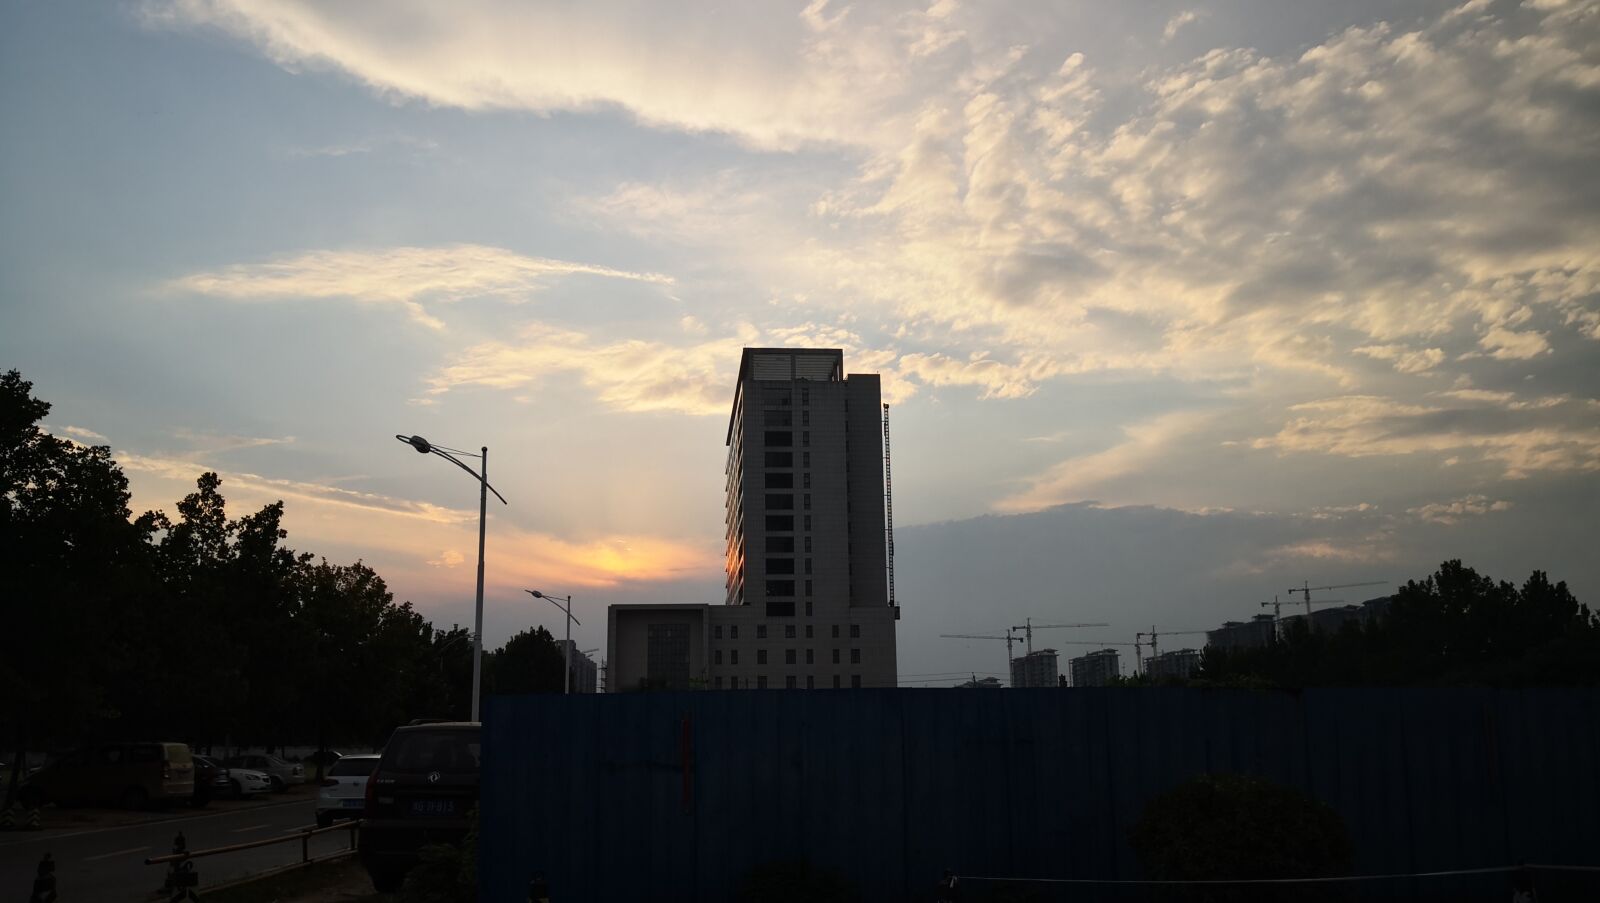 HUAWEI Mate 10 sample photo. Sunset, architecture, sky photography